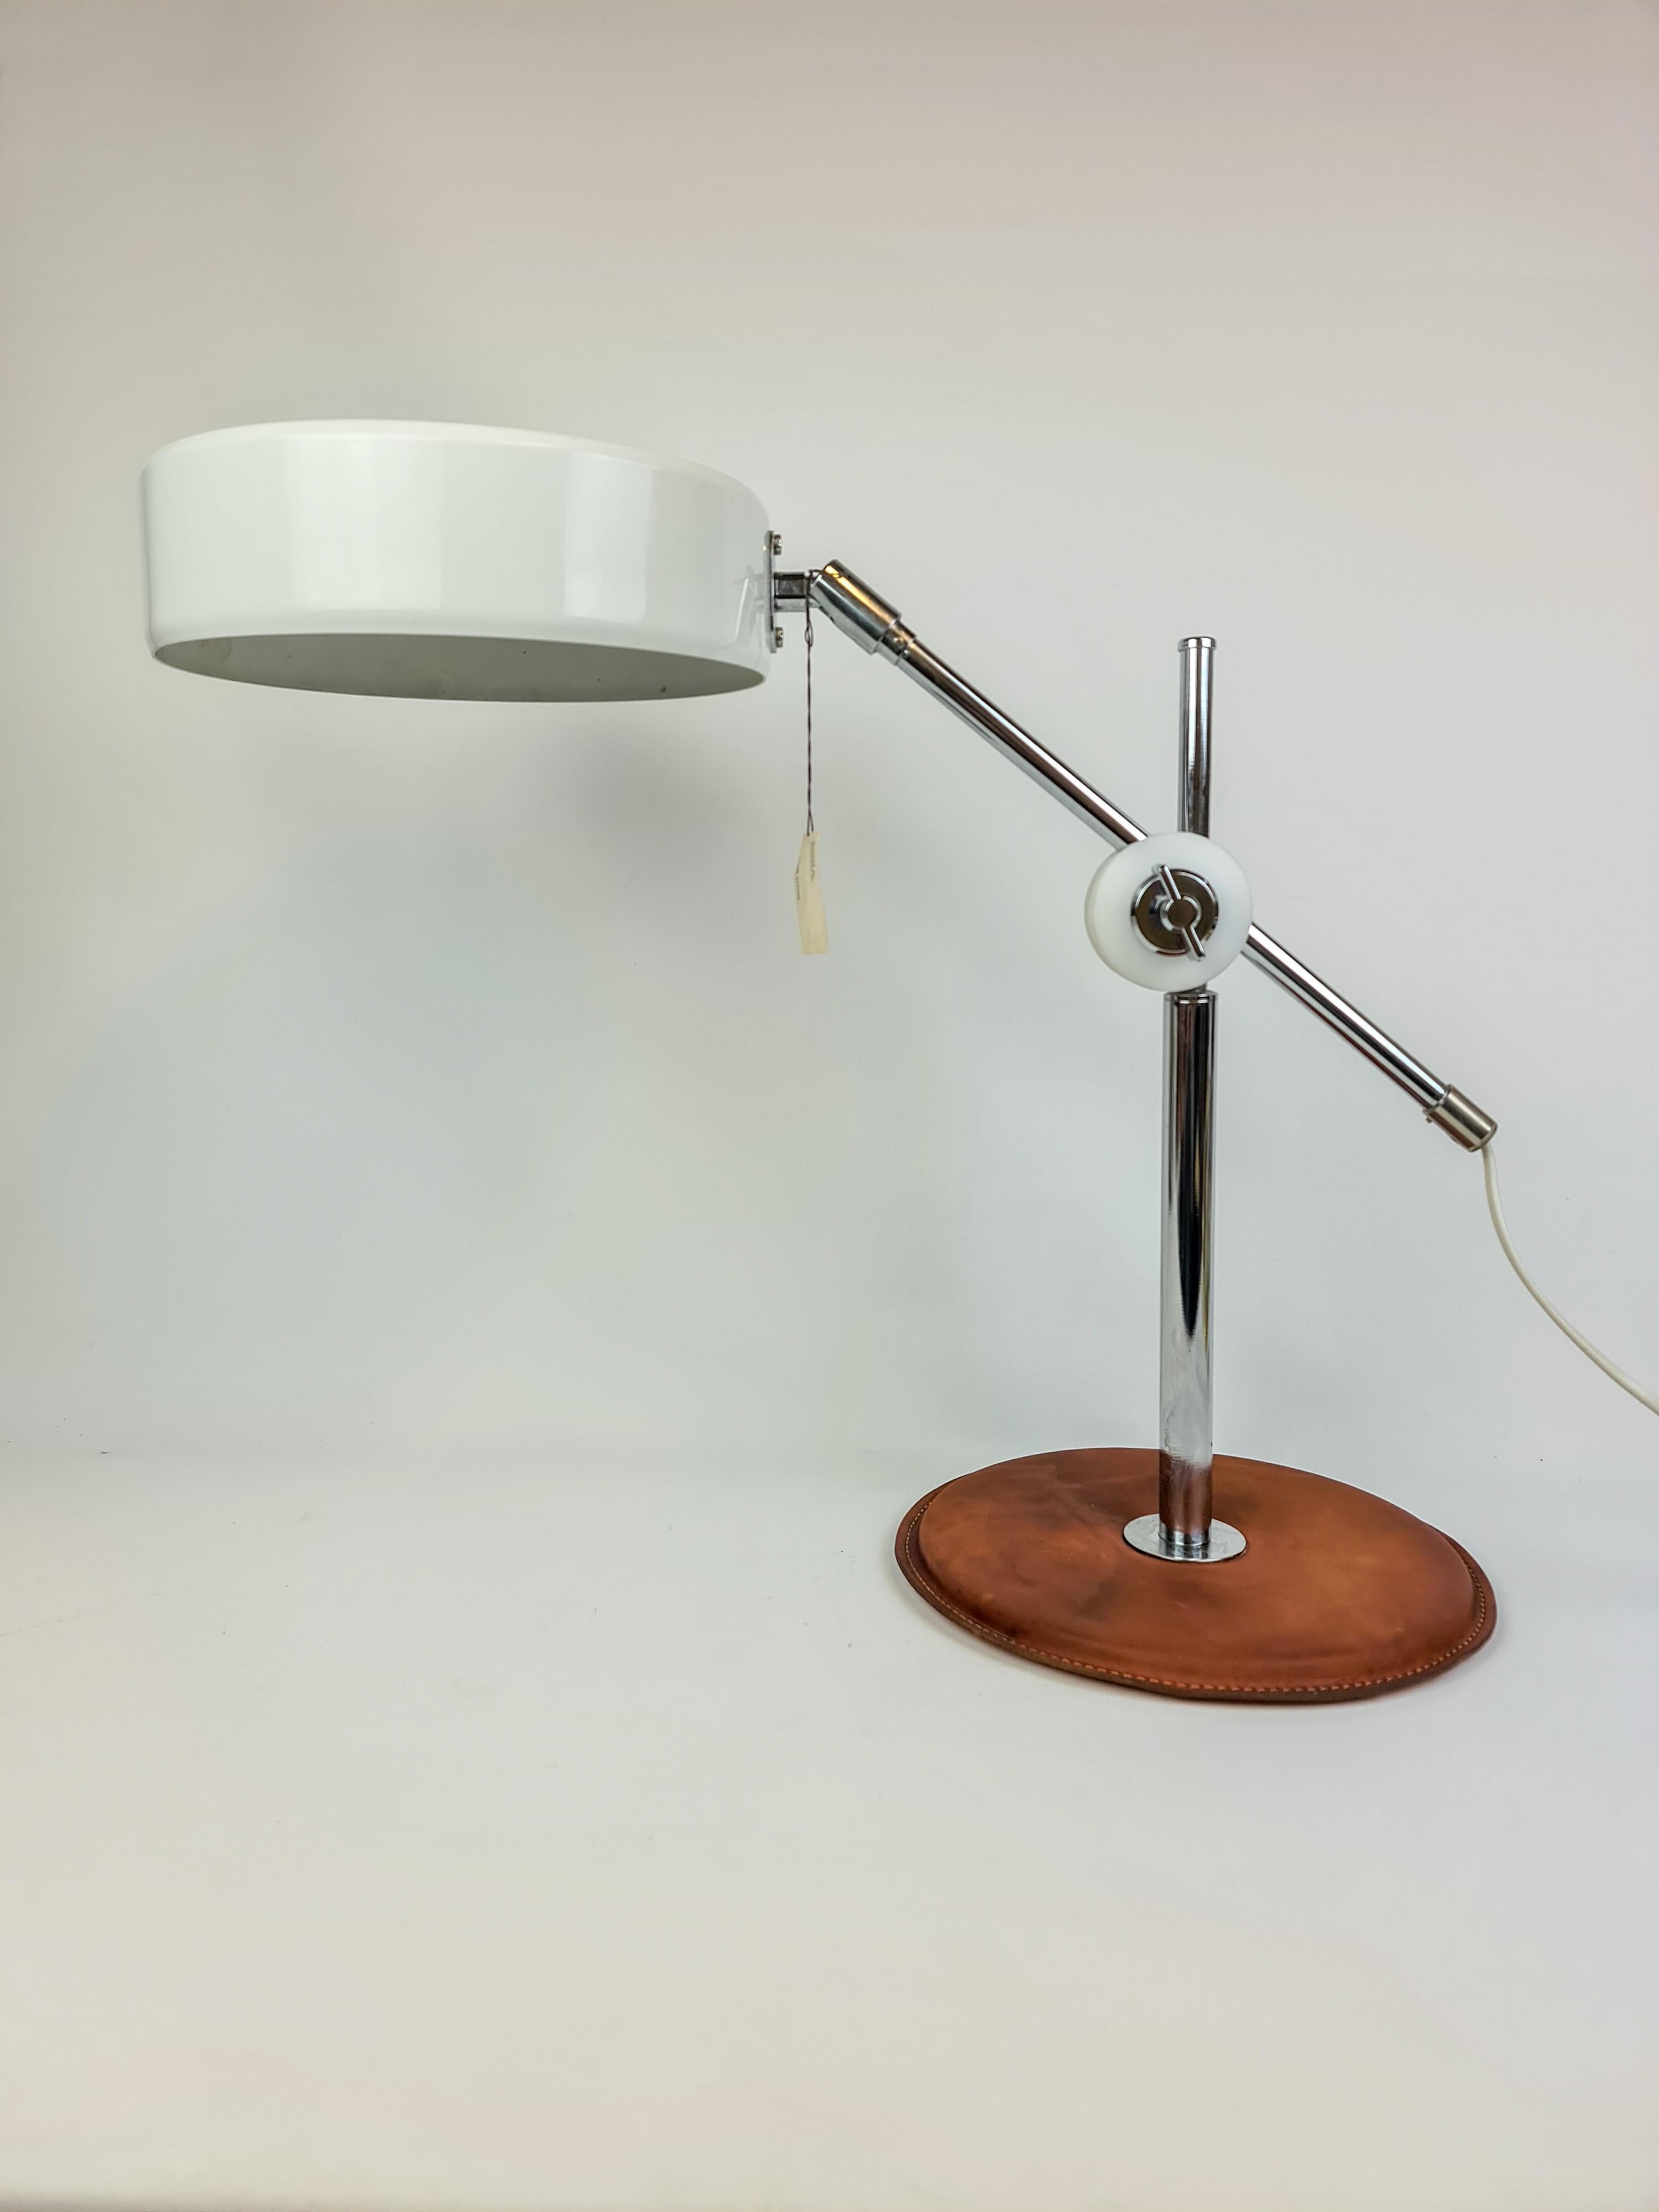 This Simris table lamp was designed by Anders Pehrson for Atelje Lyjktan Sweden in the early 1970s. It has a nice patinated brown leather base and chrome details to the lamp and white shade in metallic. 

Fully functional, complete. Original label